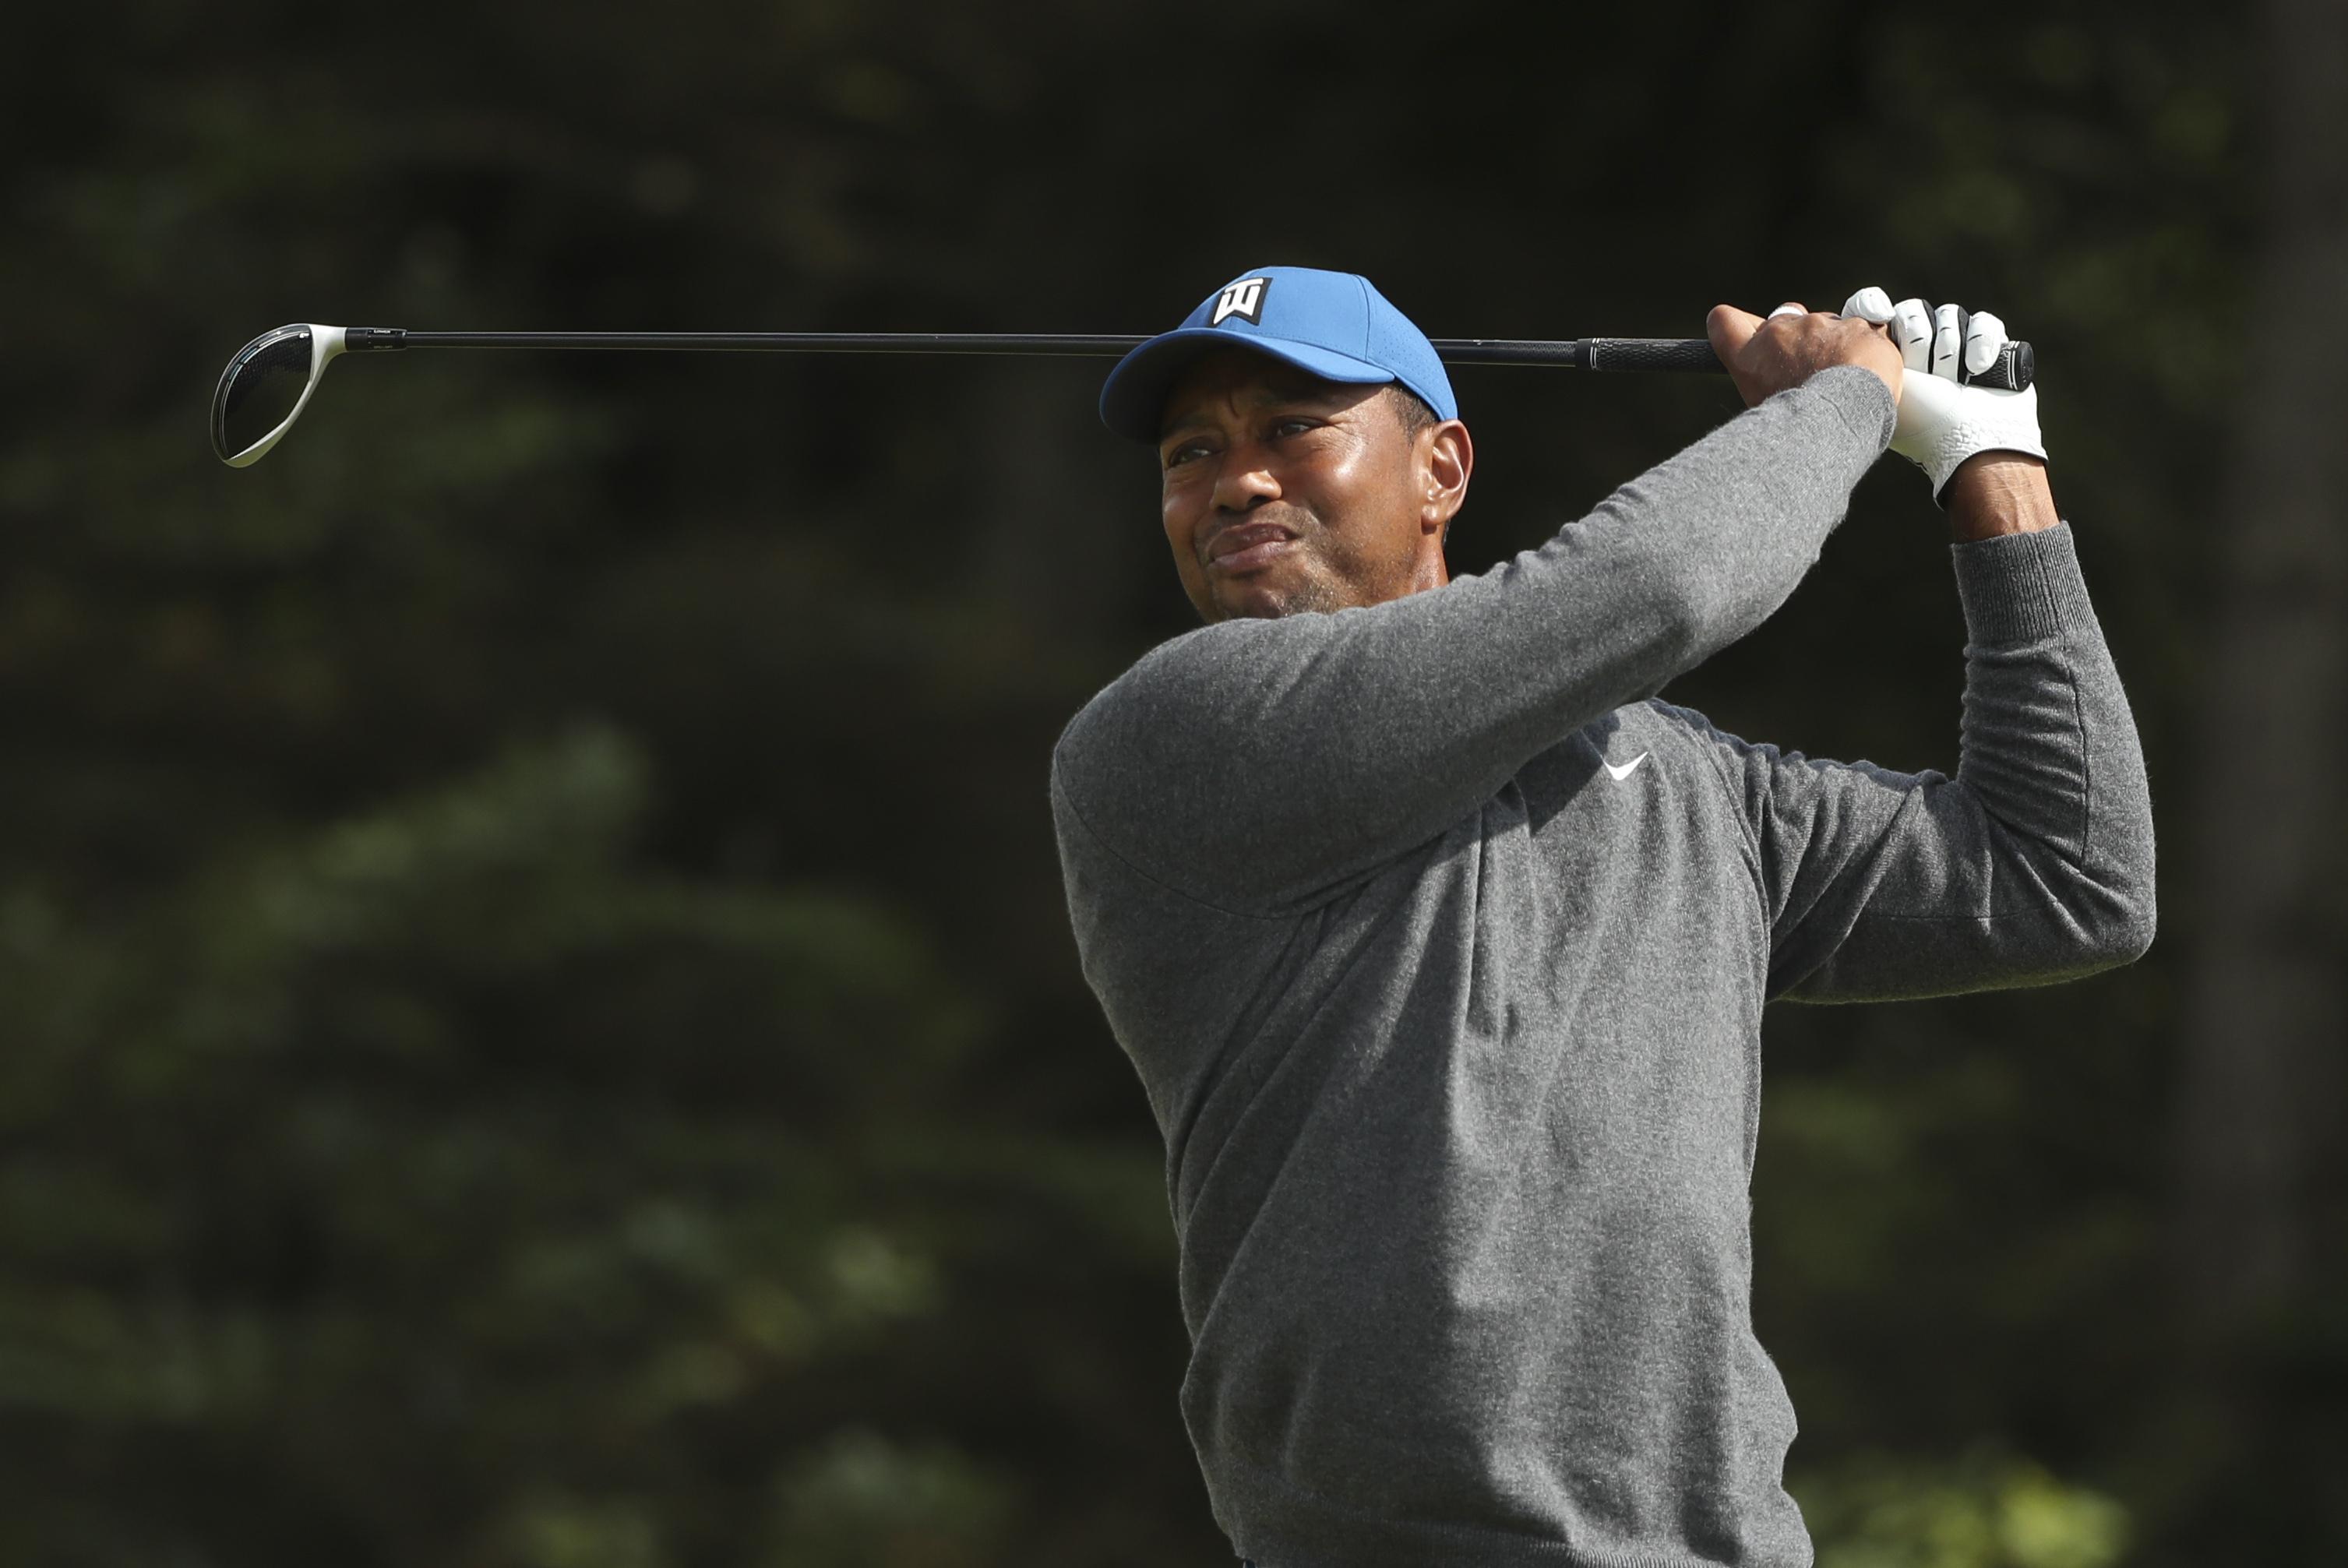 The usual crowd support saw an unusual score for Tiger Woods | The Spokesman-Review